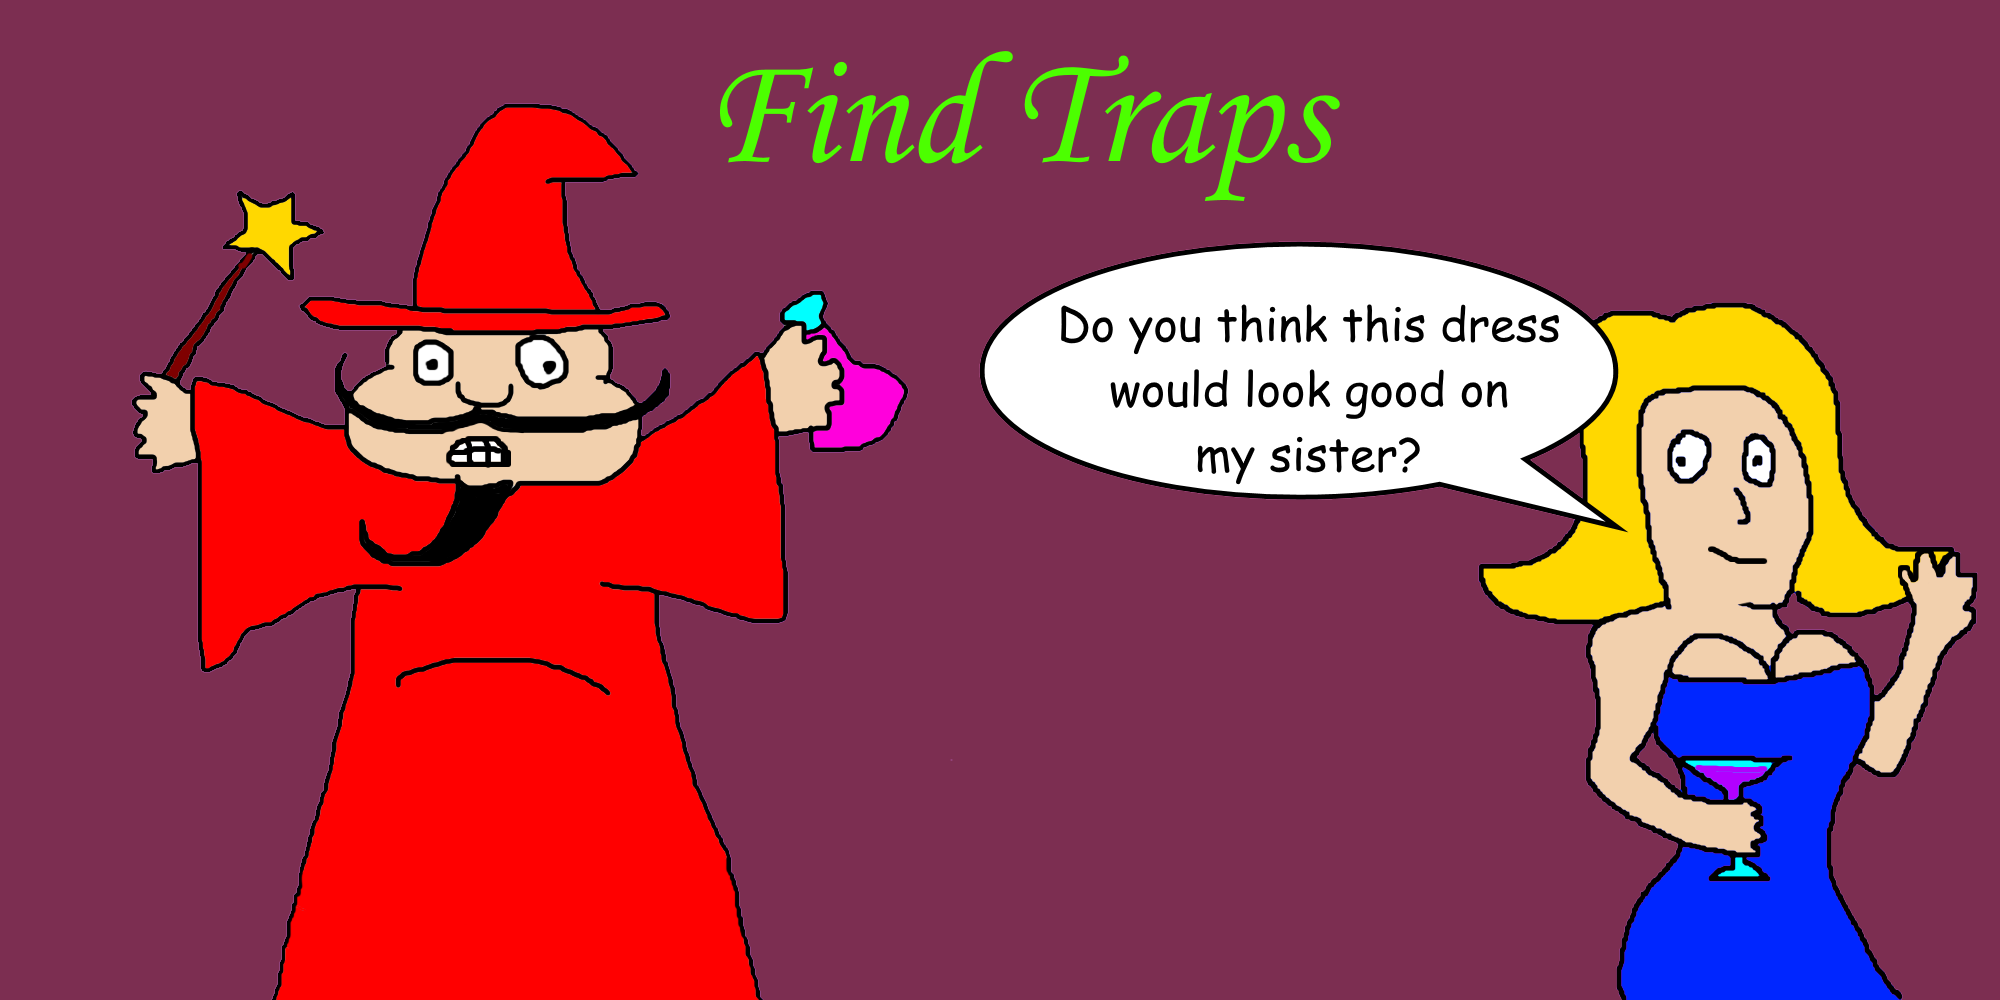 rtraps  Discover